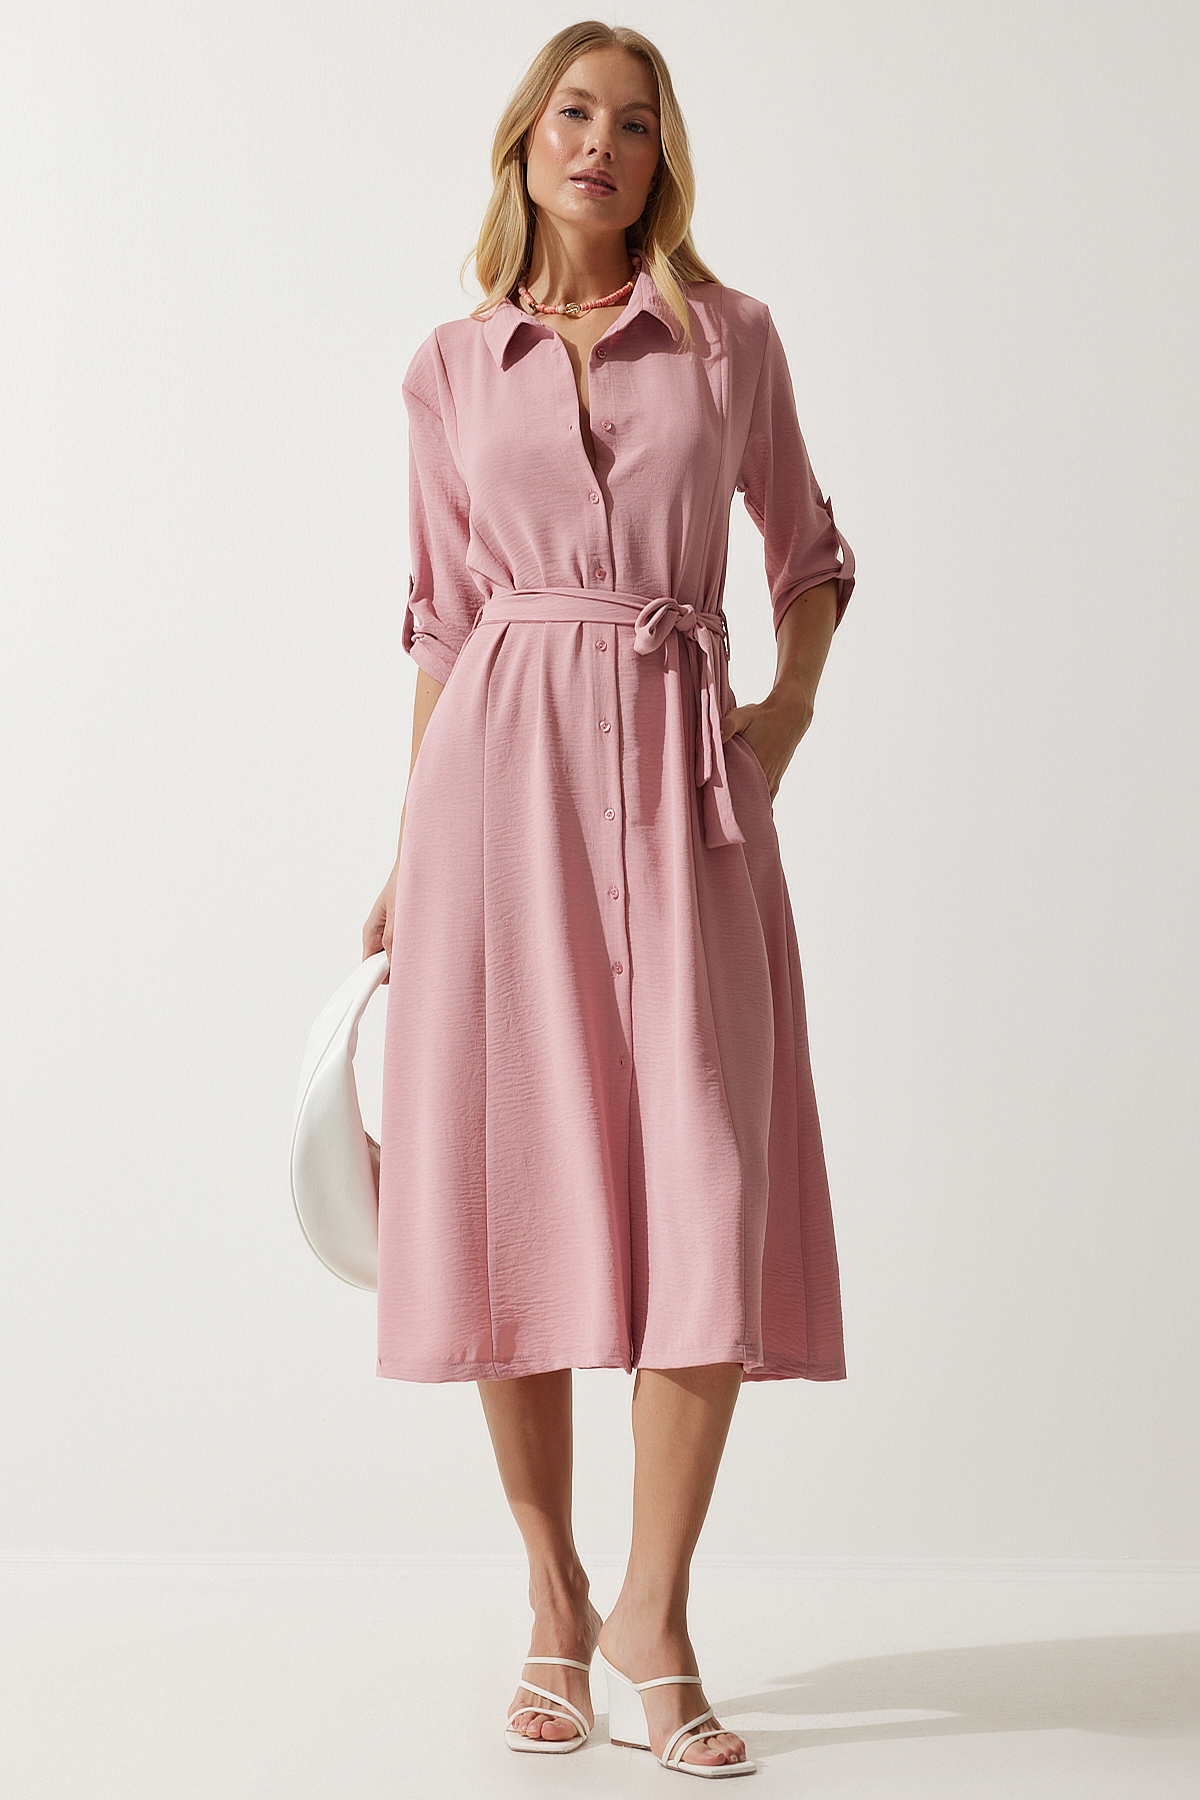 Levně Happiness İstanbul Women's Candy Pink Belted Shirt Dress